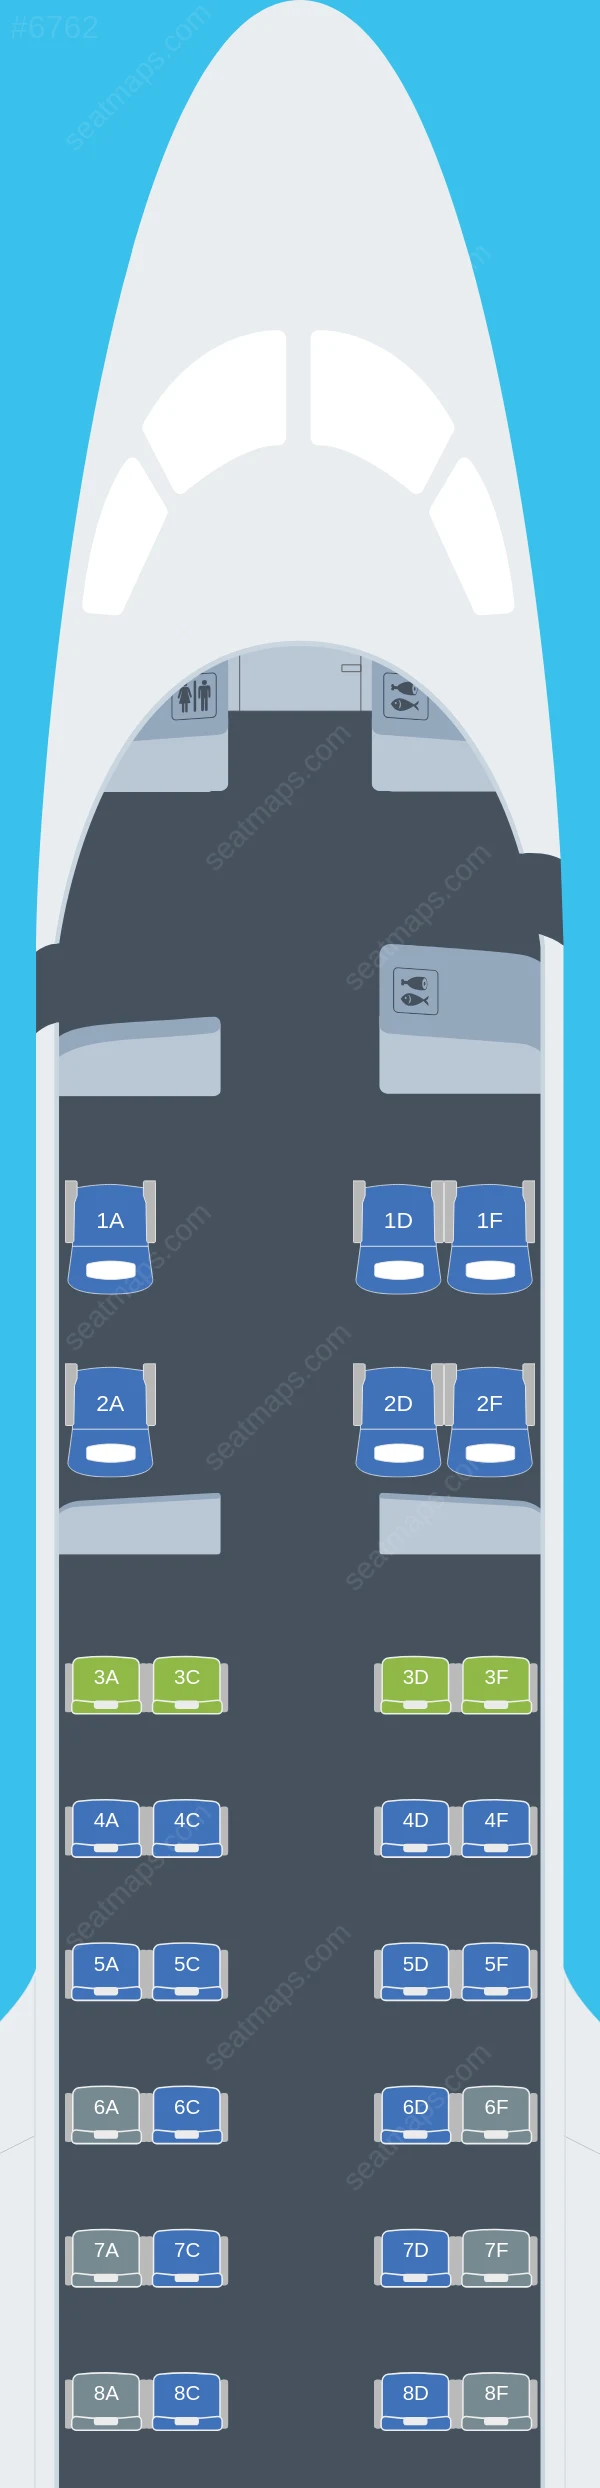 Airlink Embraer E170 seatmap preview